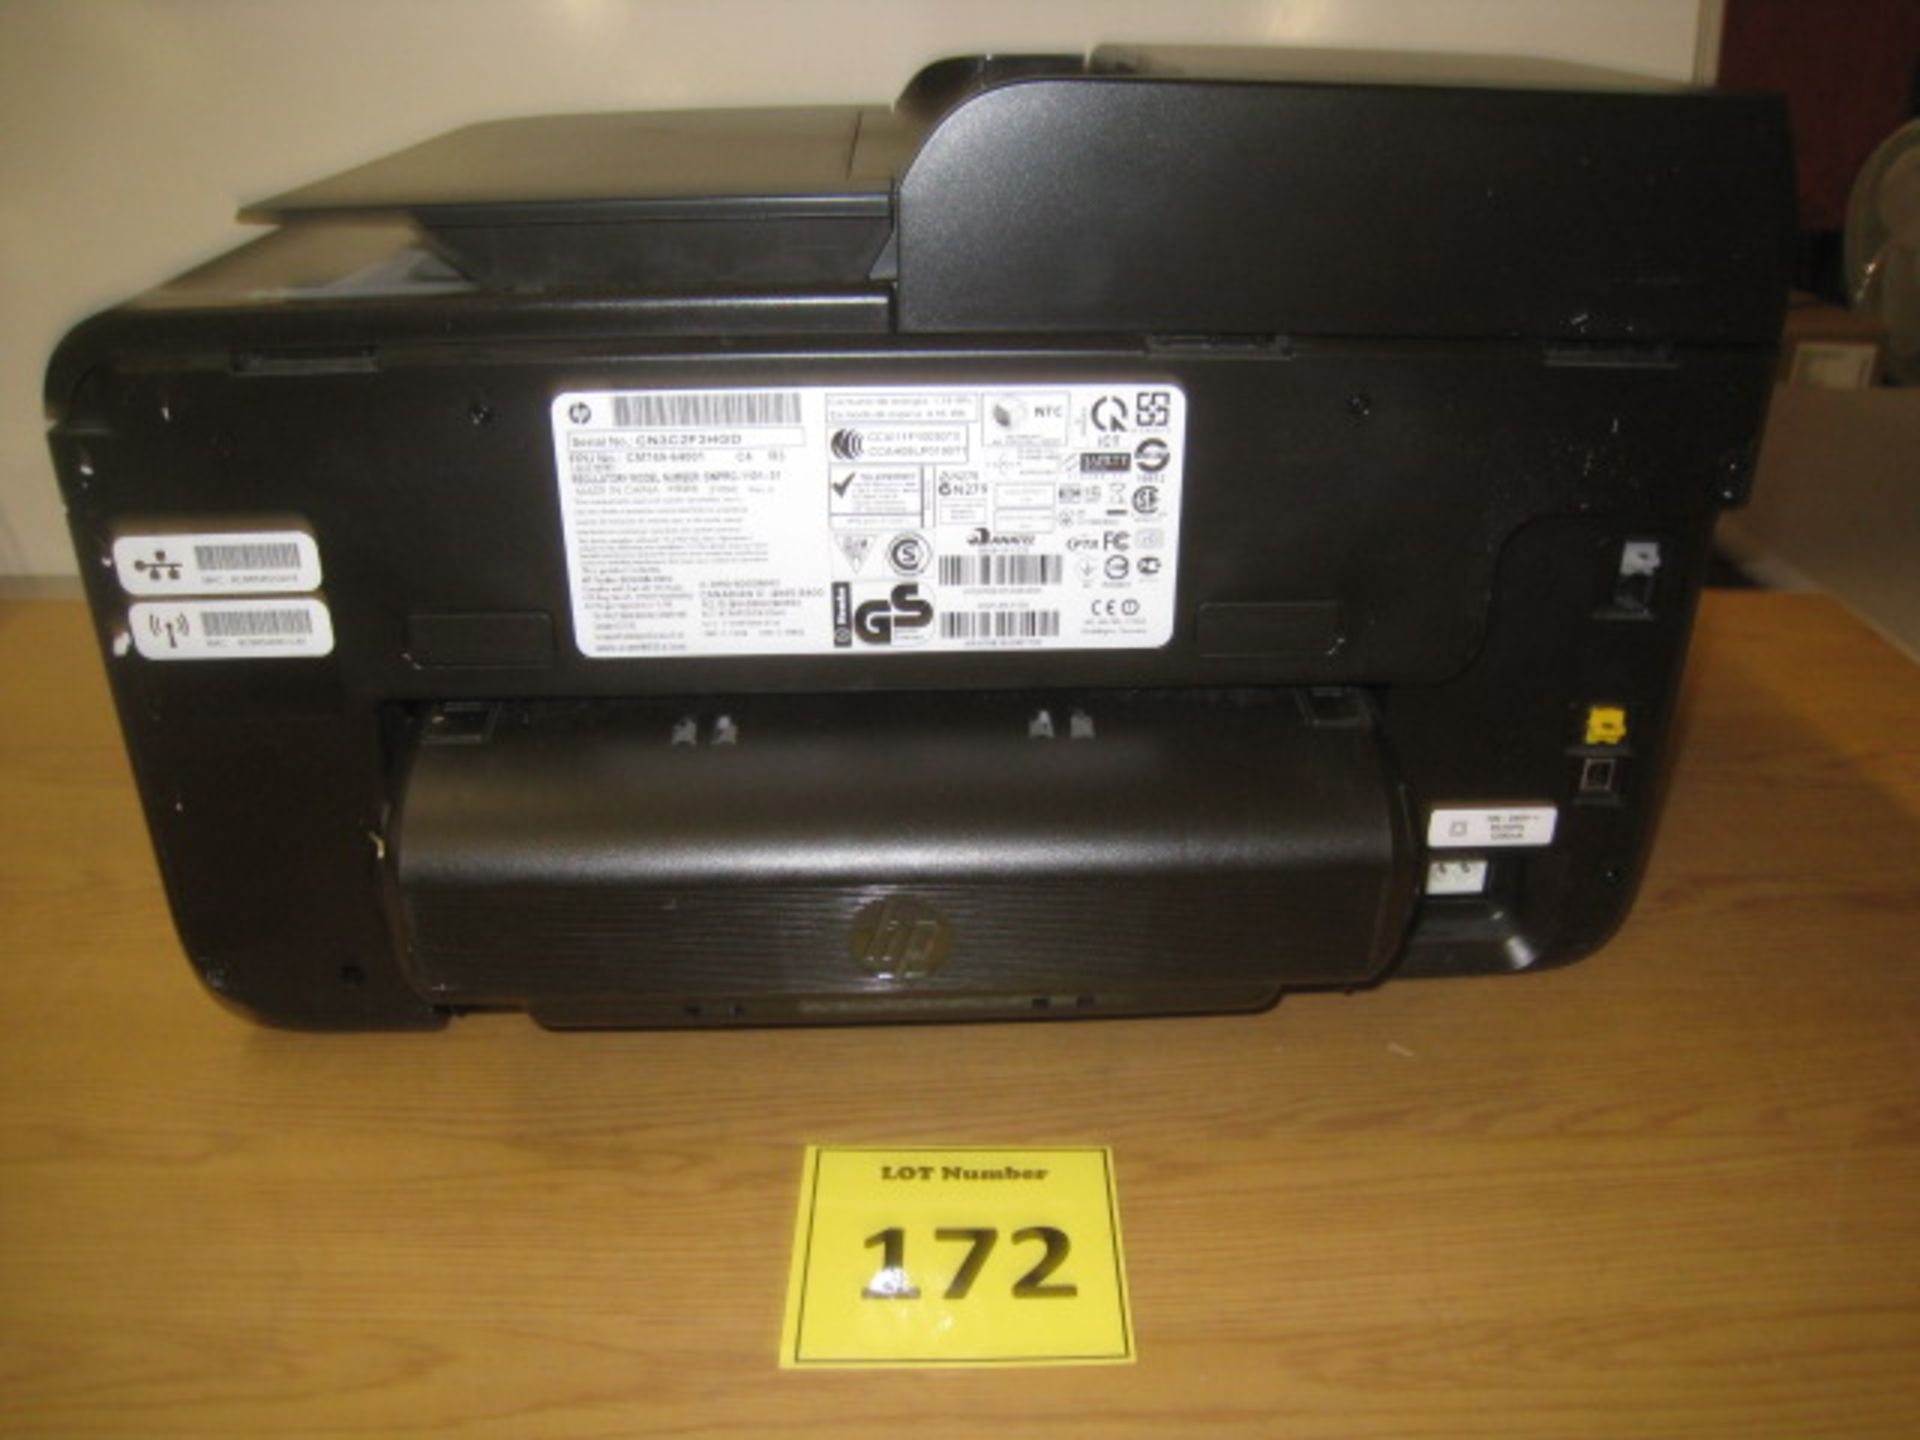 HP OFFICEJET PRO 8600 COLOUR INKJET PRINTER, SCANNER, COPIER, FAX, WIRELESS. WITH BUILT IN - Image 2 of 3